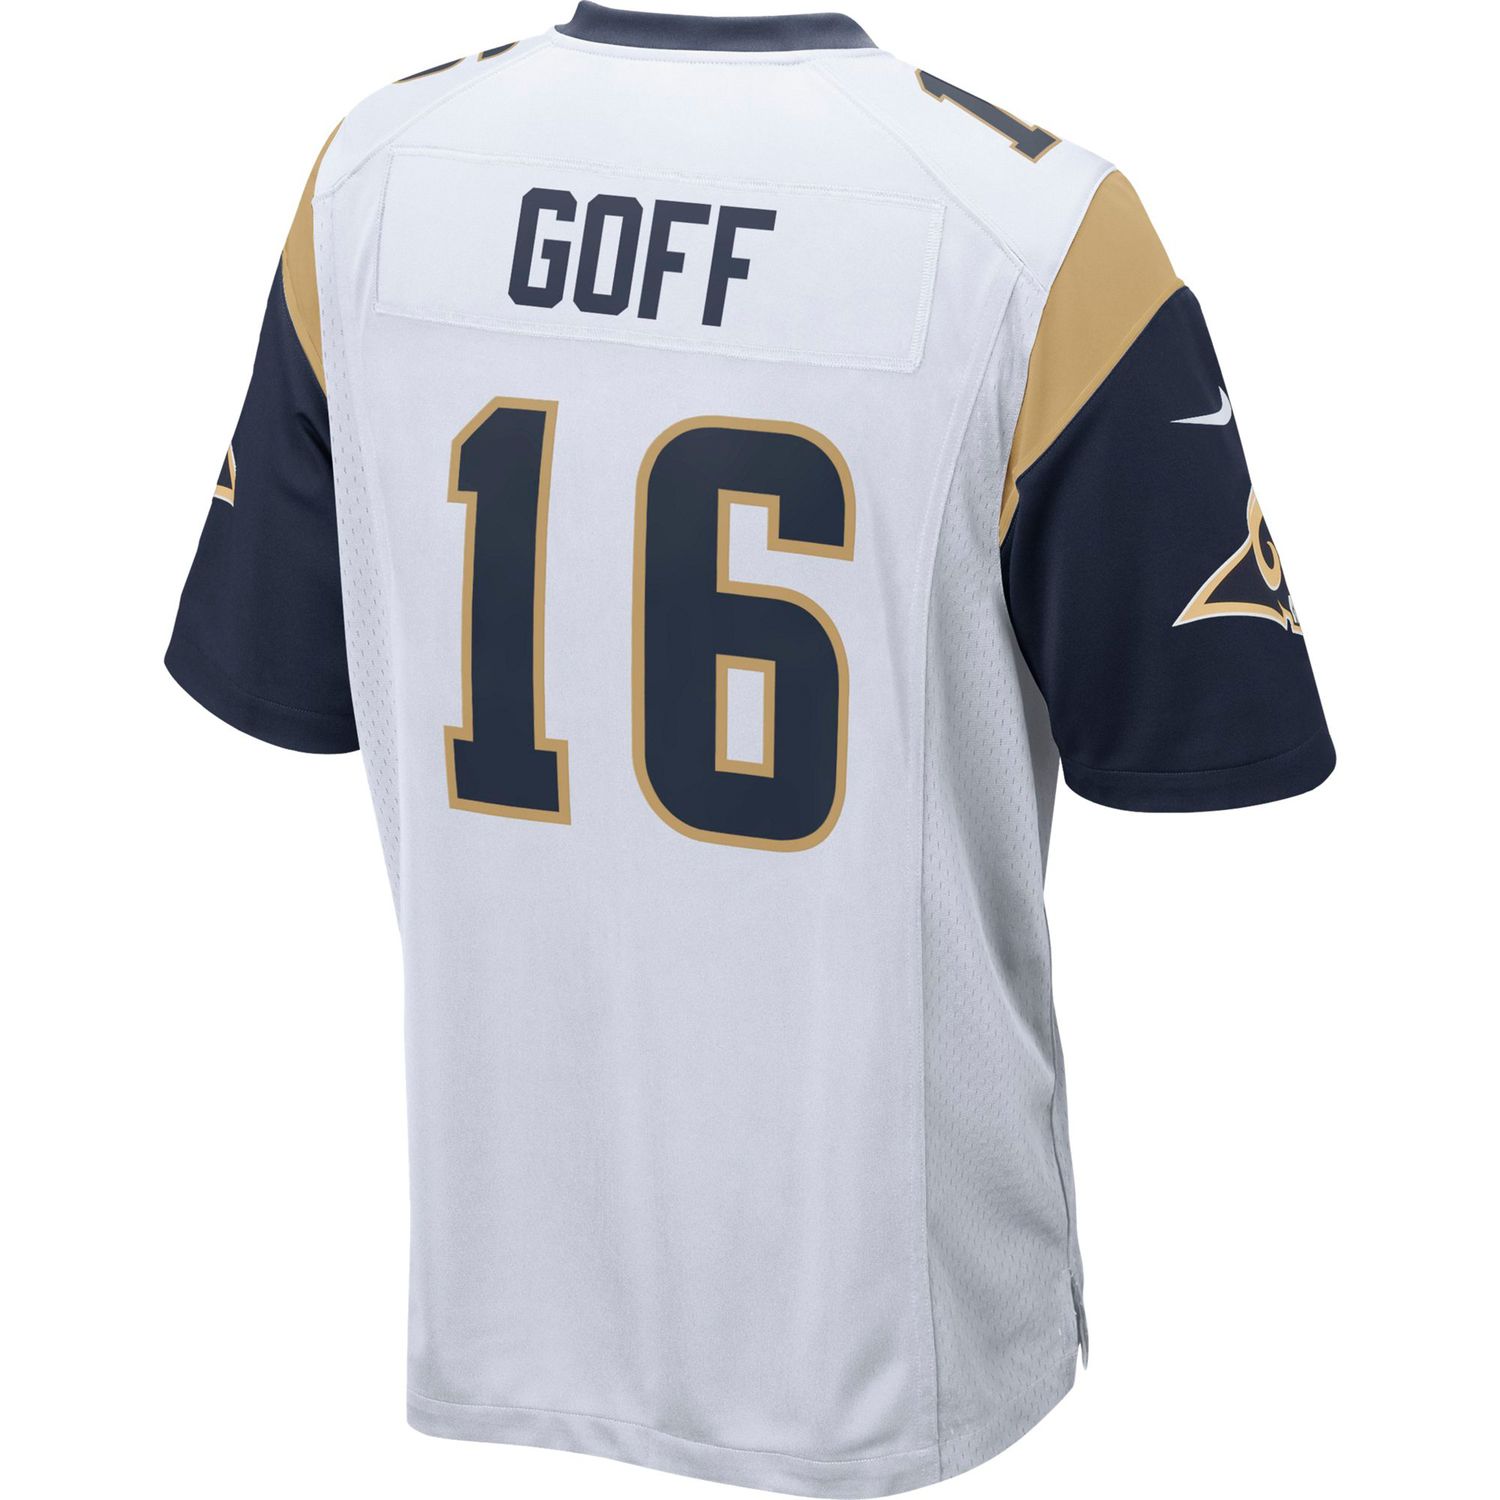 jared goff signed jersey